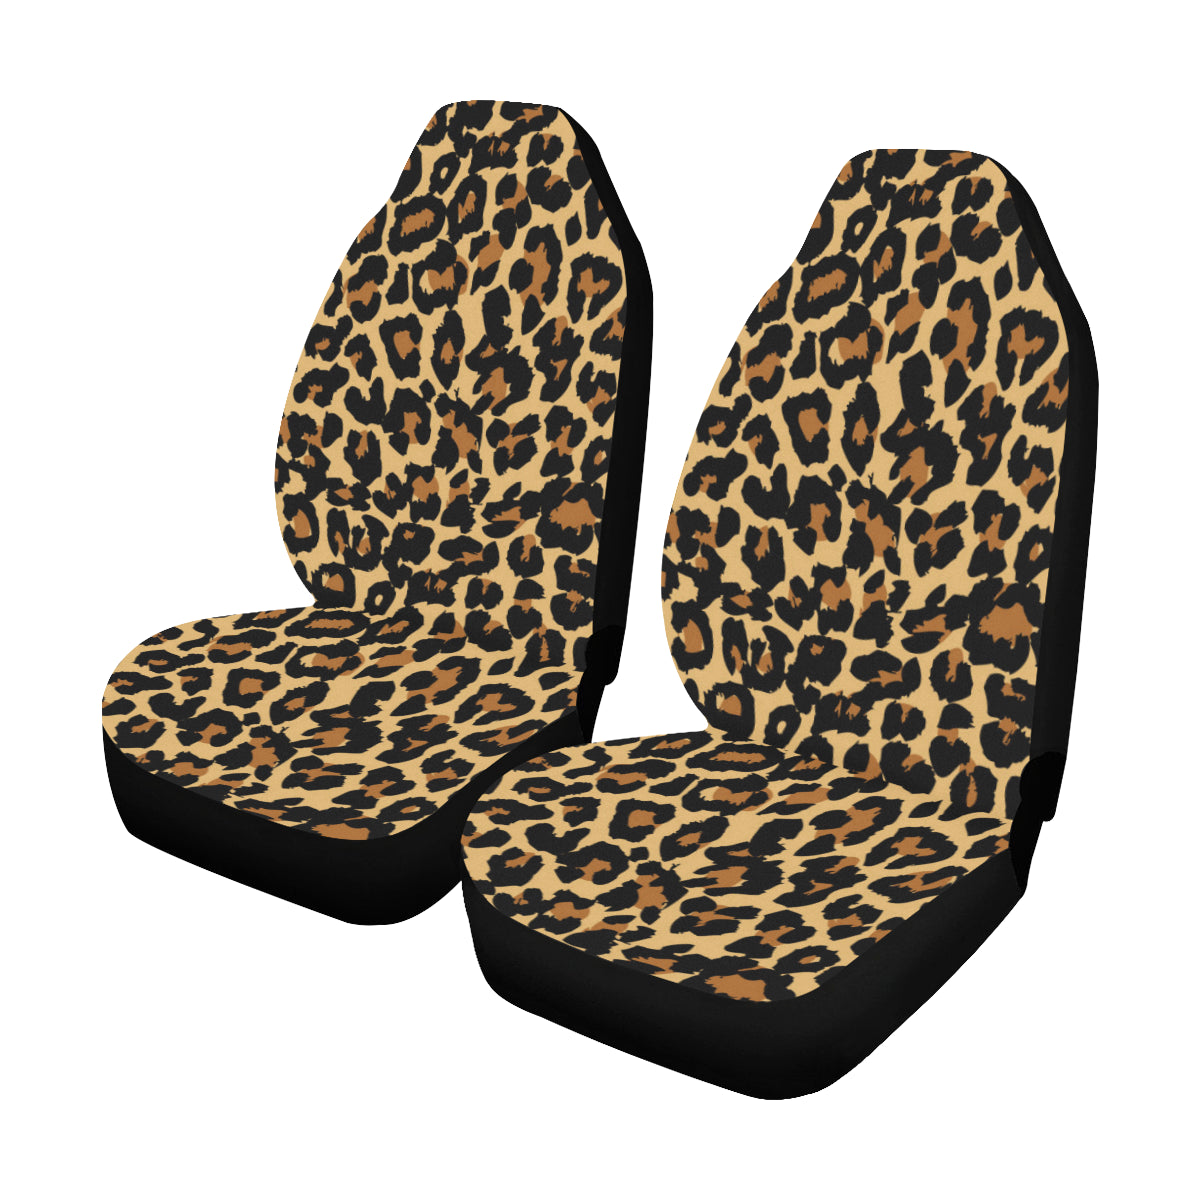 Leopard Car Seat Covers 2 pc, Animal Print Cheetah Pattern Front Seat Covers Cute Car SUV Seat Protector Accessory Decoration Starcove Fashion